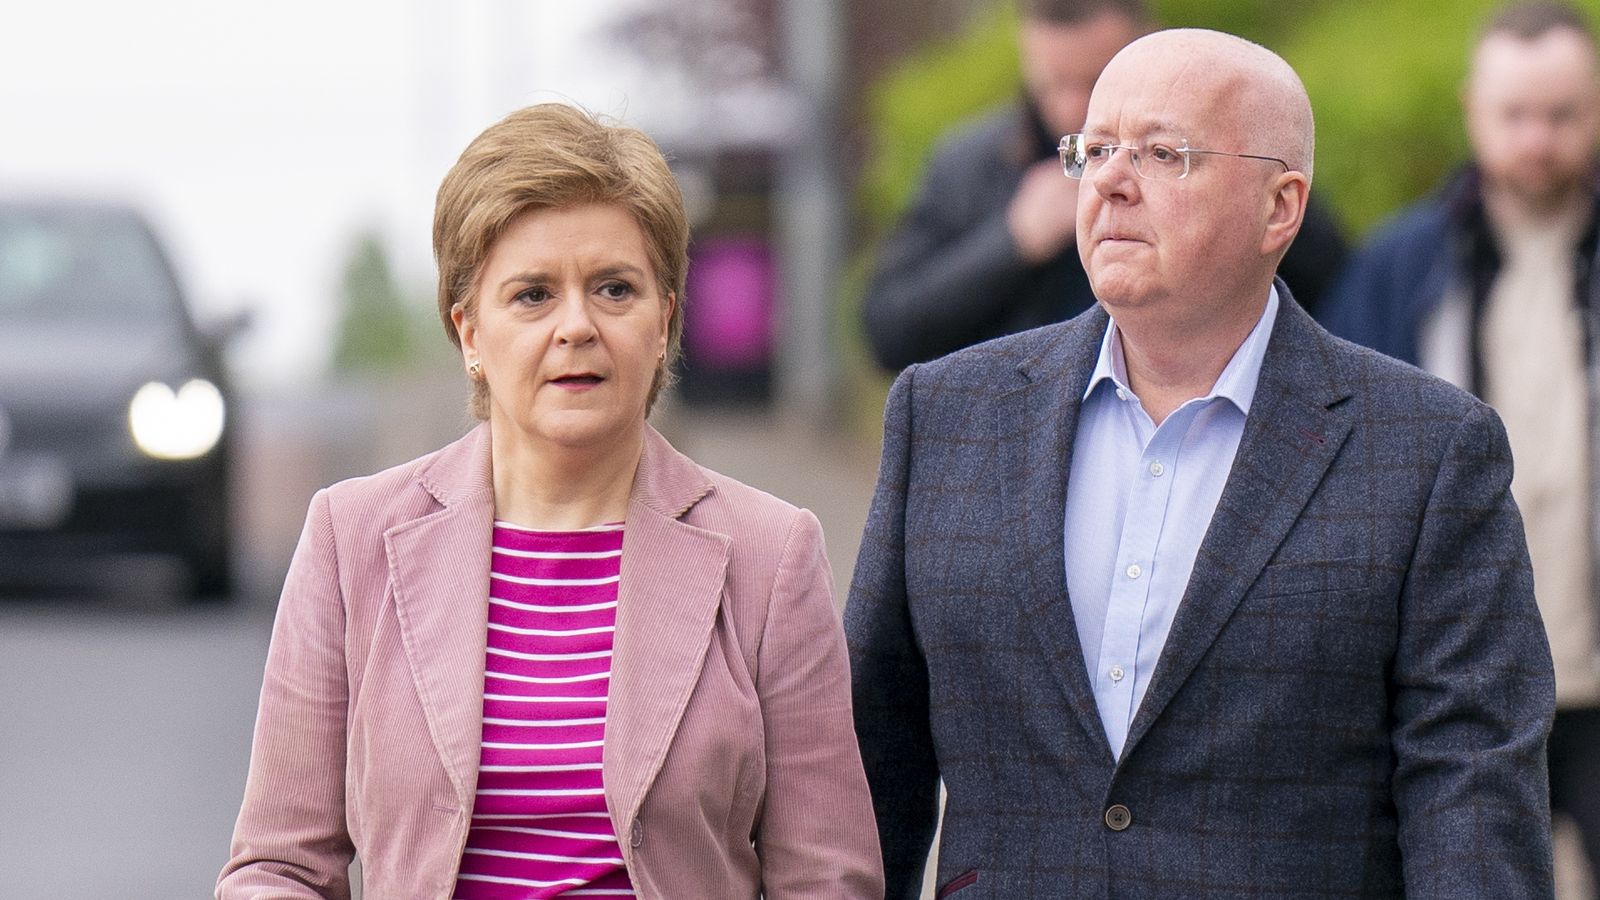 Nicola Sturgeon's husband arrested in connection with SNP funding and finances investigation